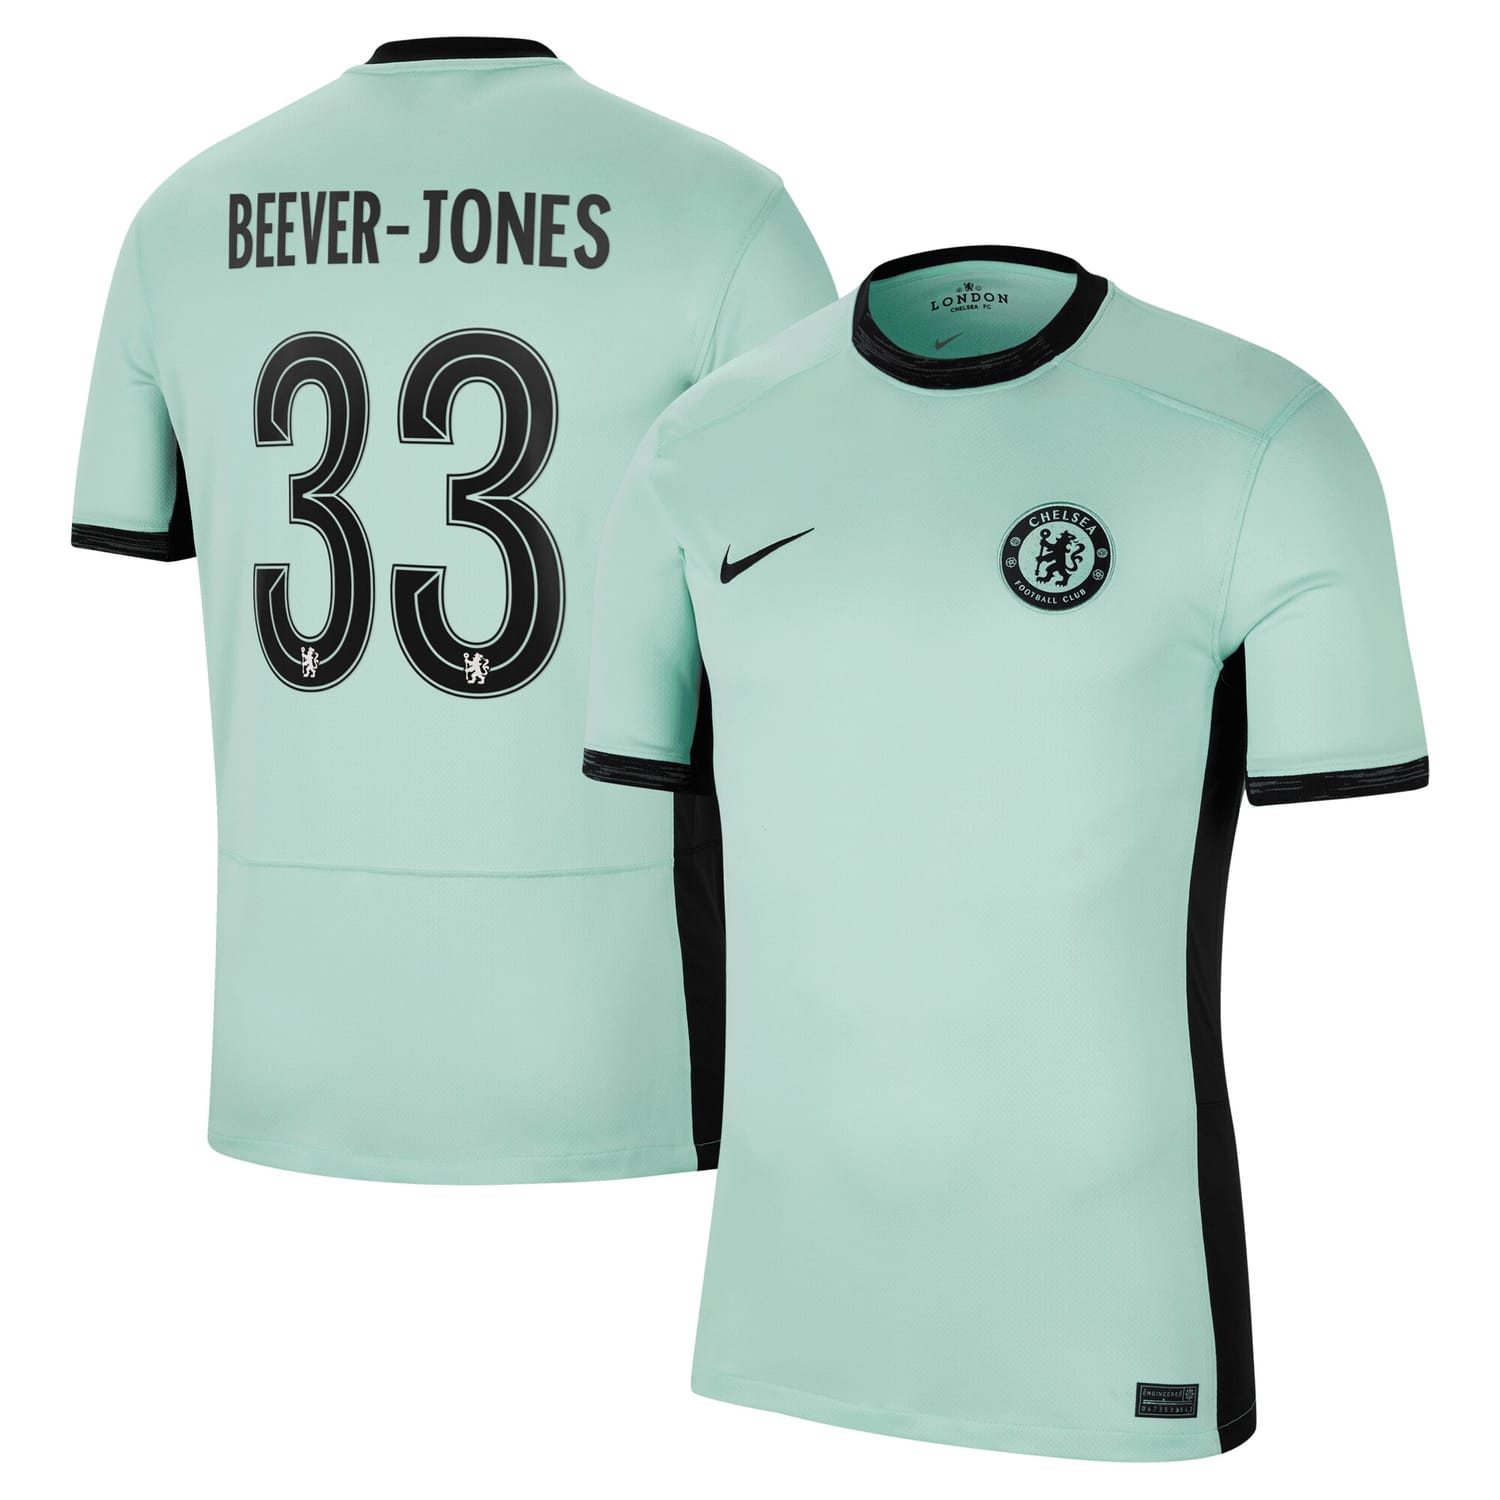 Premier League Chelsea Third Jersey Shirt 2023-24 player Aggie Beever-Jones 33 printing for Men